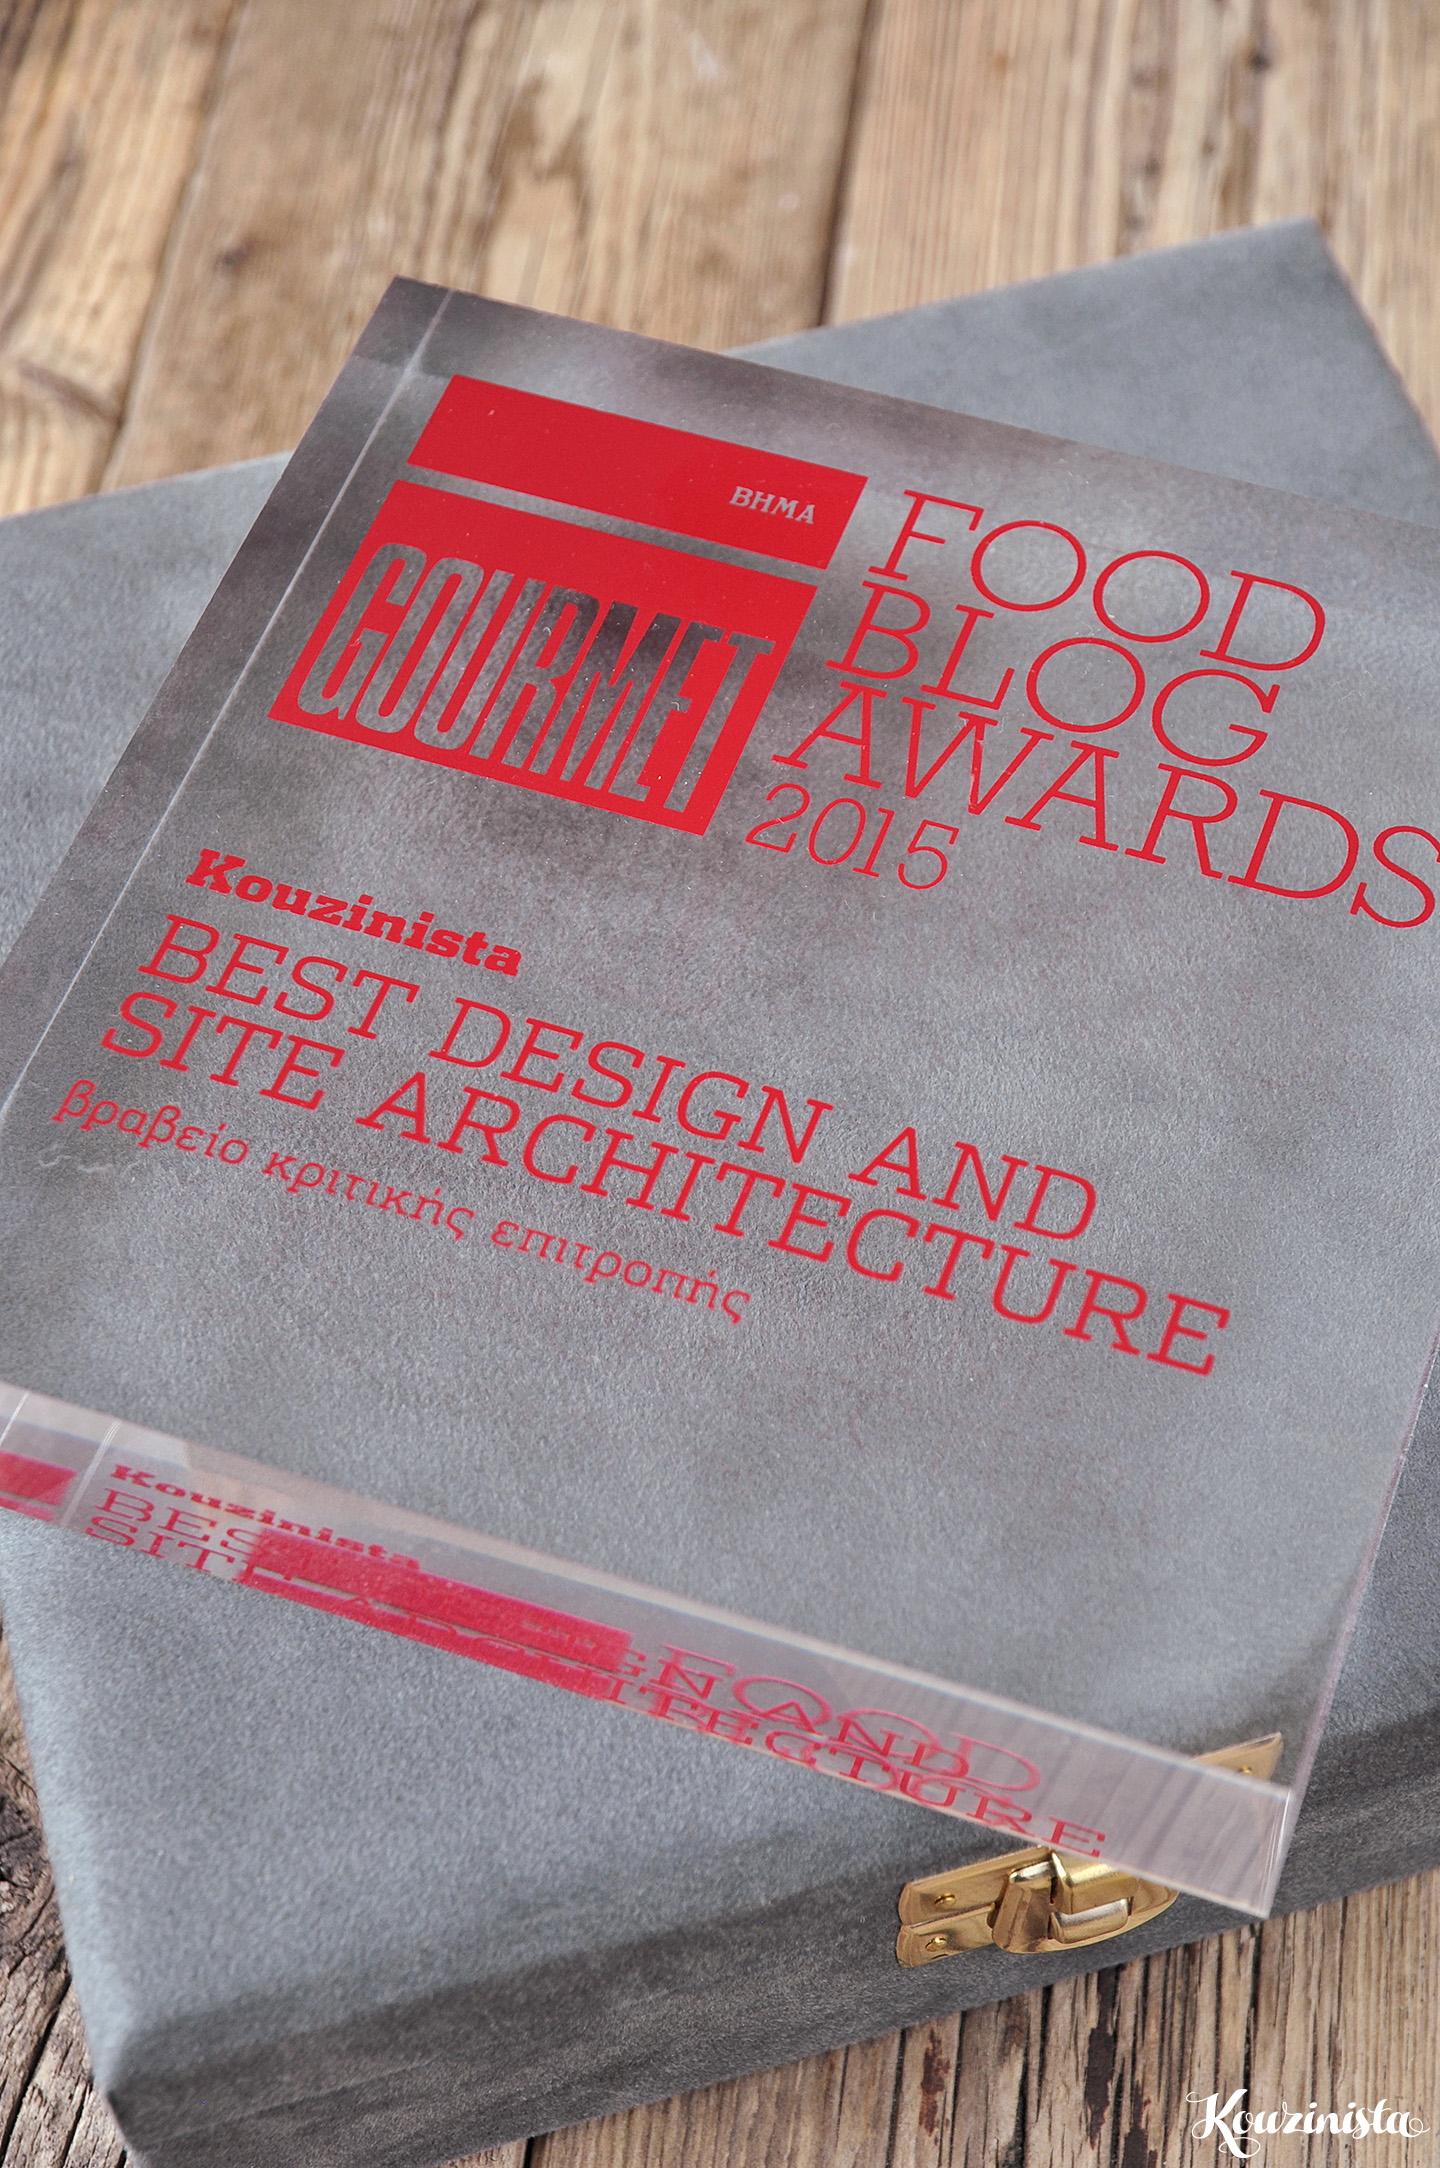 BHMAgourmet Food Blog Awards 2015: Best Design and Site Architecture Award